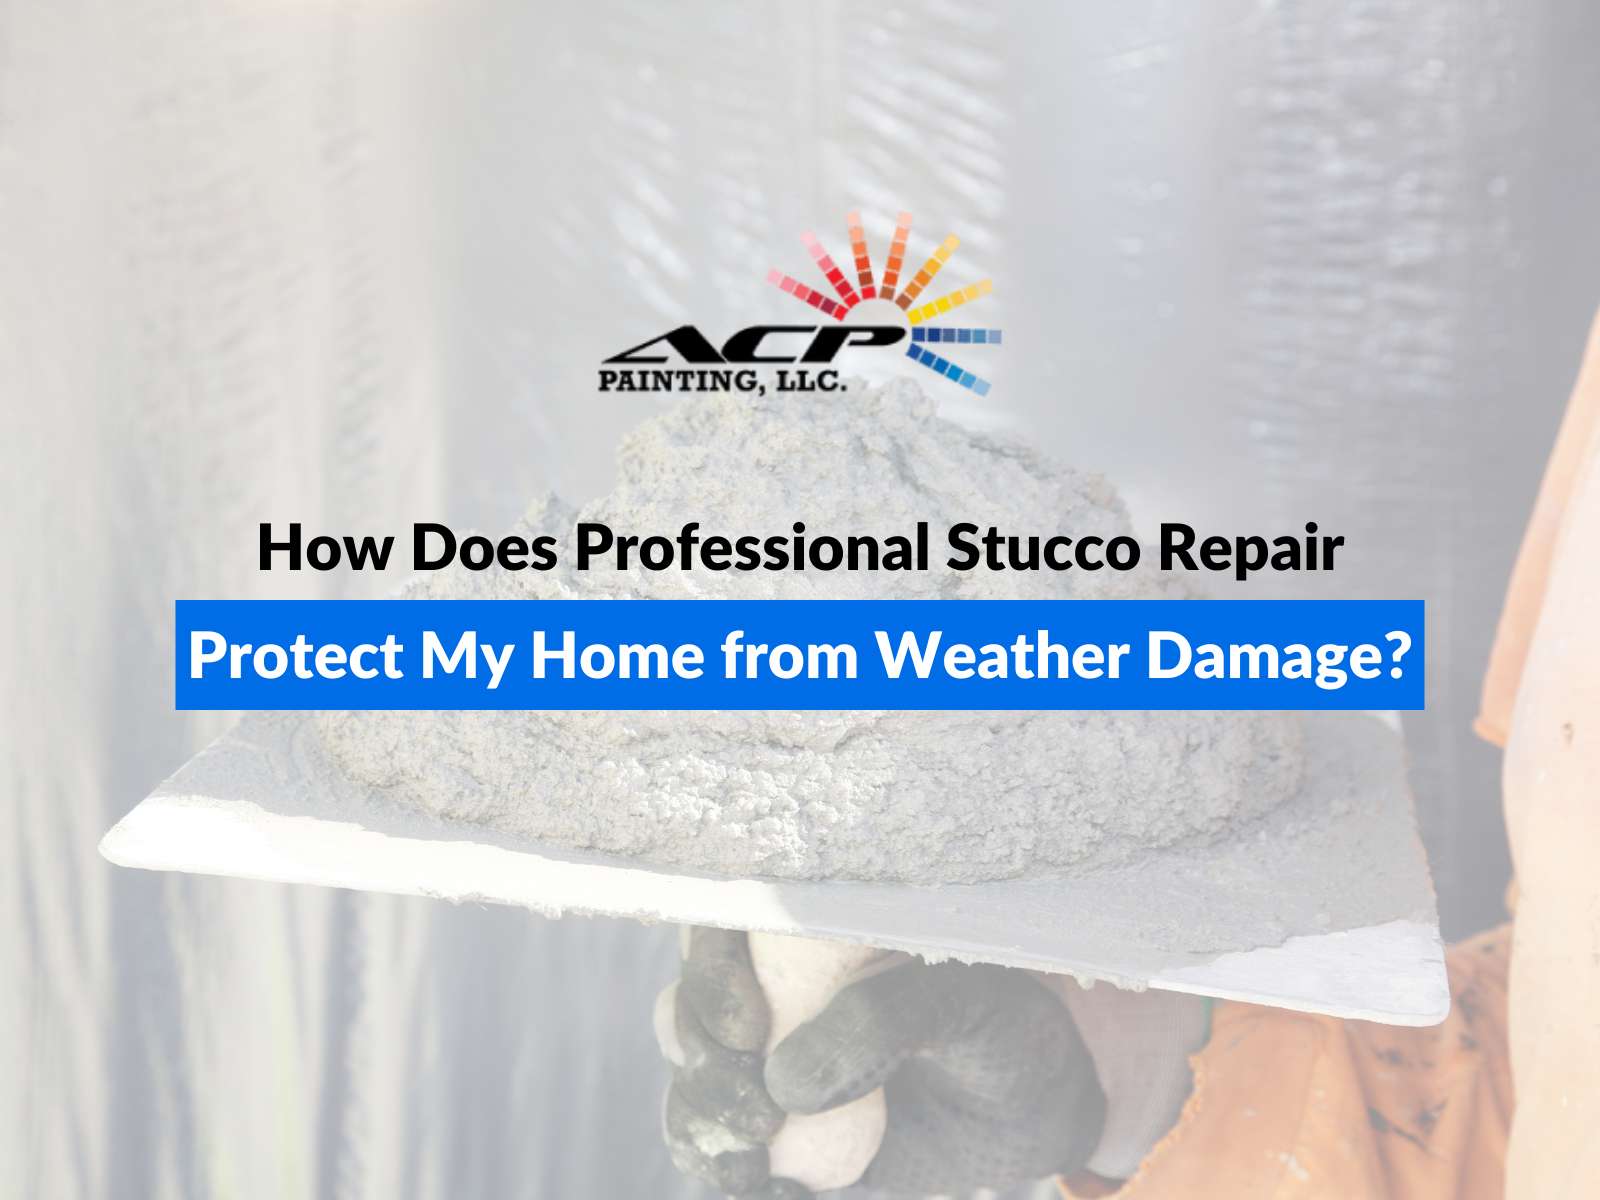 How Does Professional Stucco Repair Protect My Home from Weather Damage?